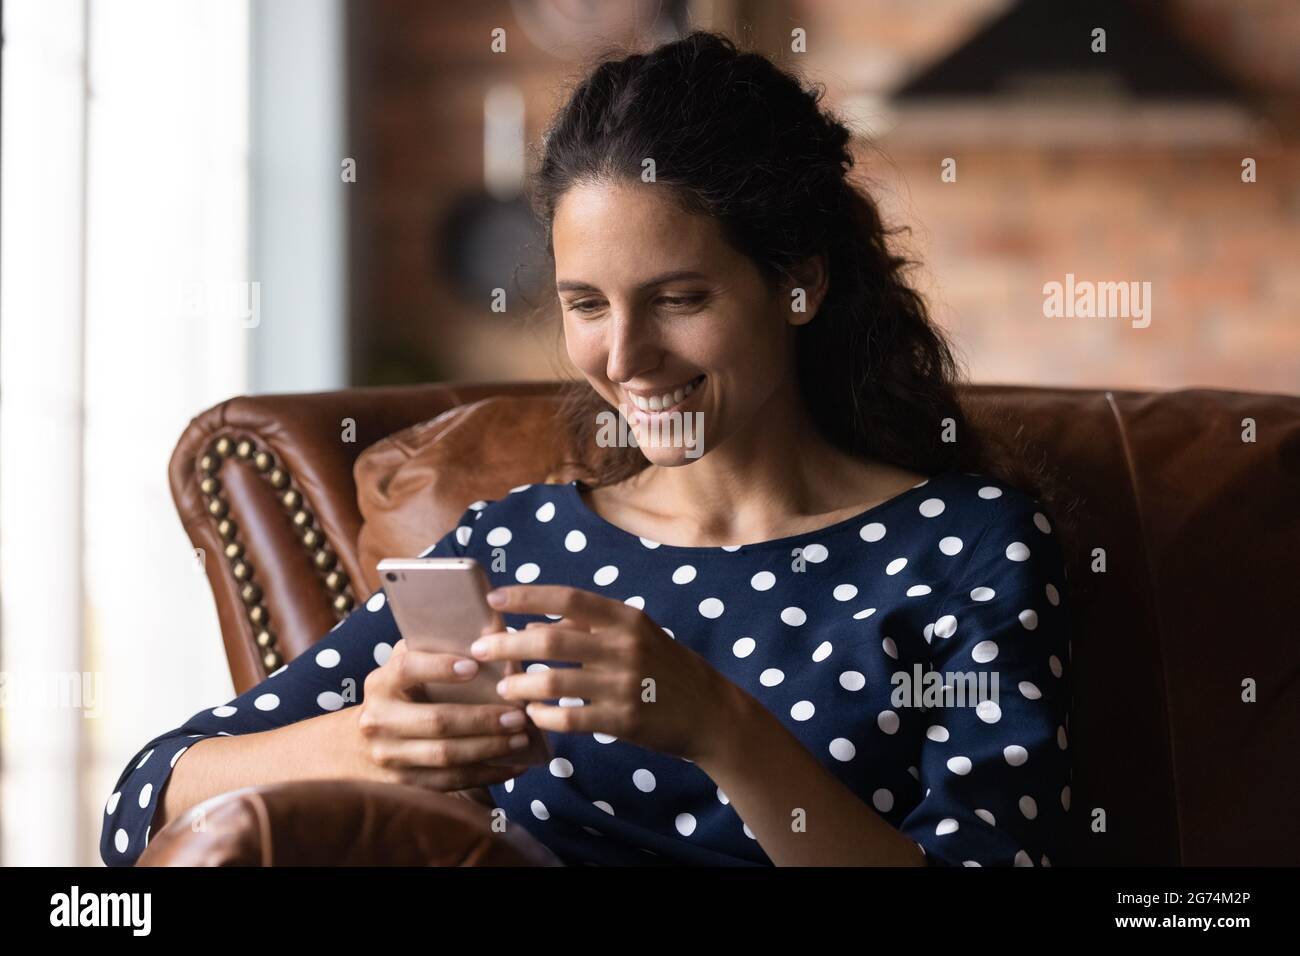 Happy smartphone user getting message with good news Stock Photo